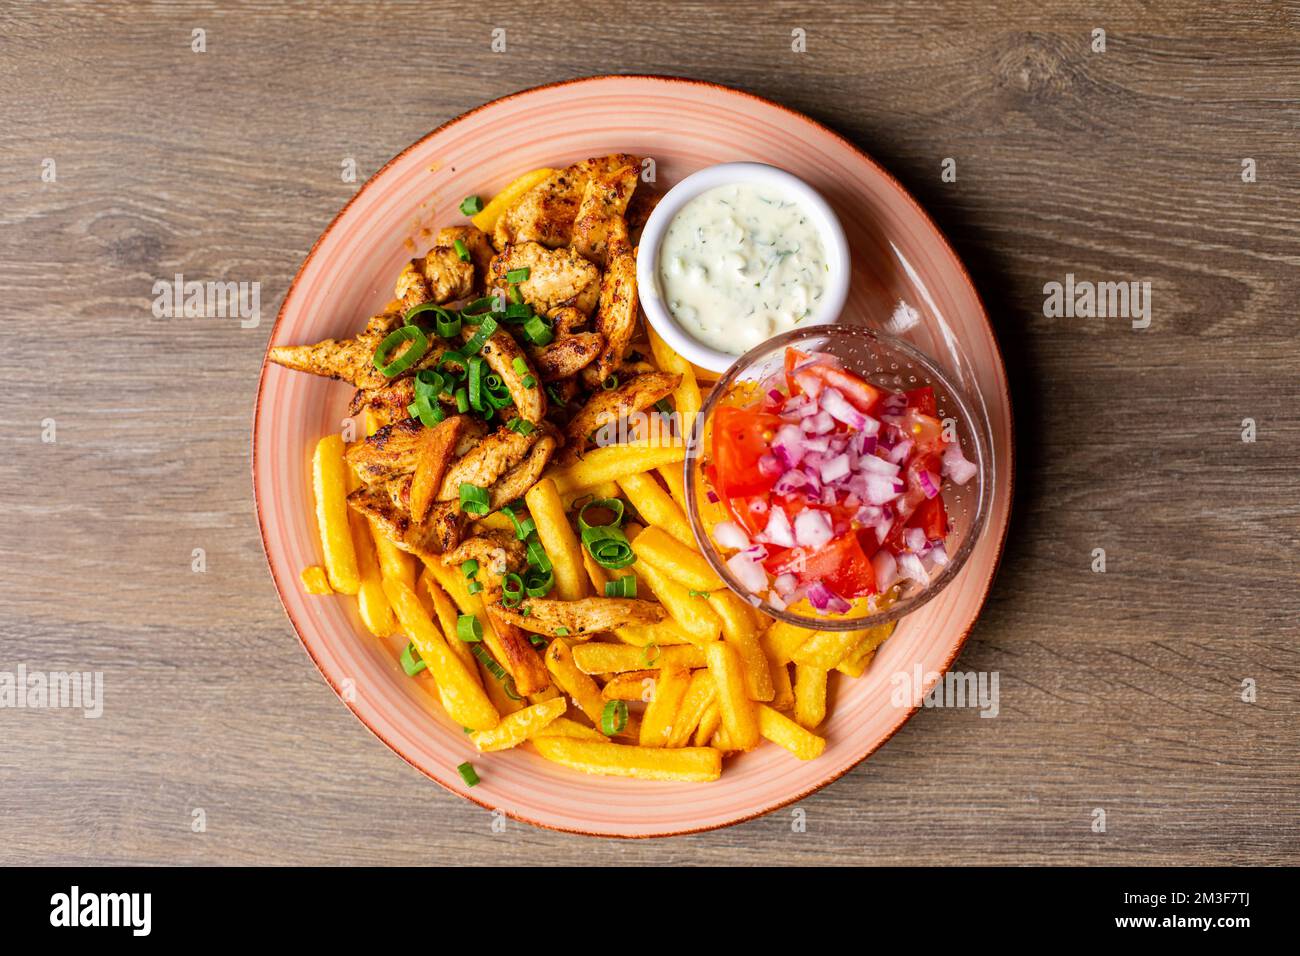 French fries, white garlic sauce, vegetable salad bowl on pink plate. Fresh appetizing, yummy, tasty plate of fast food Stock Photo